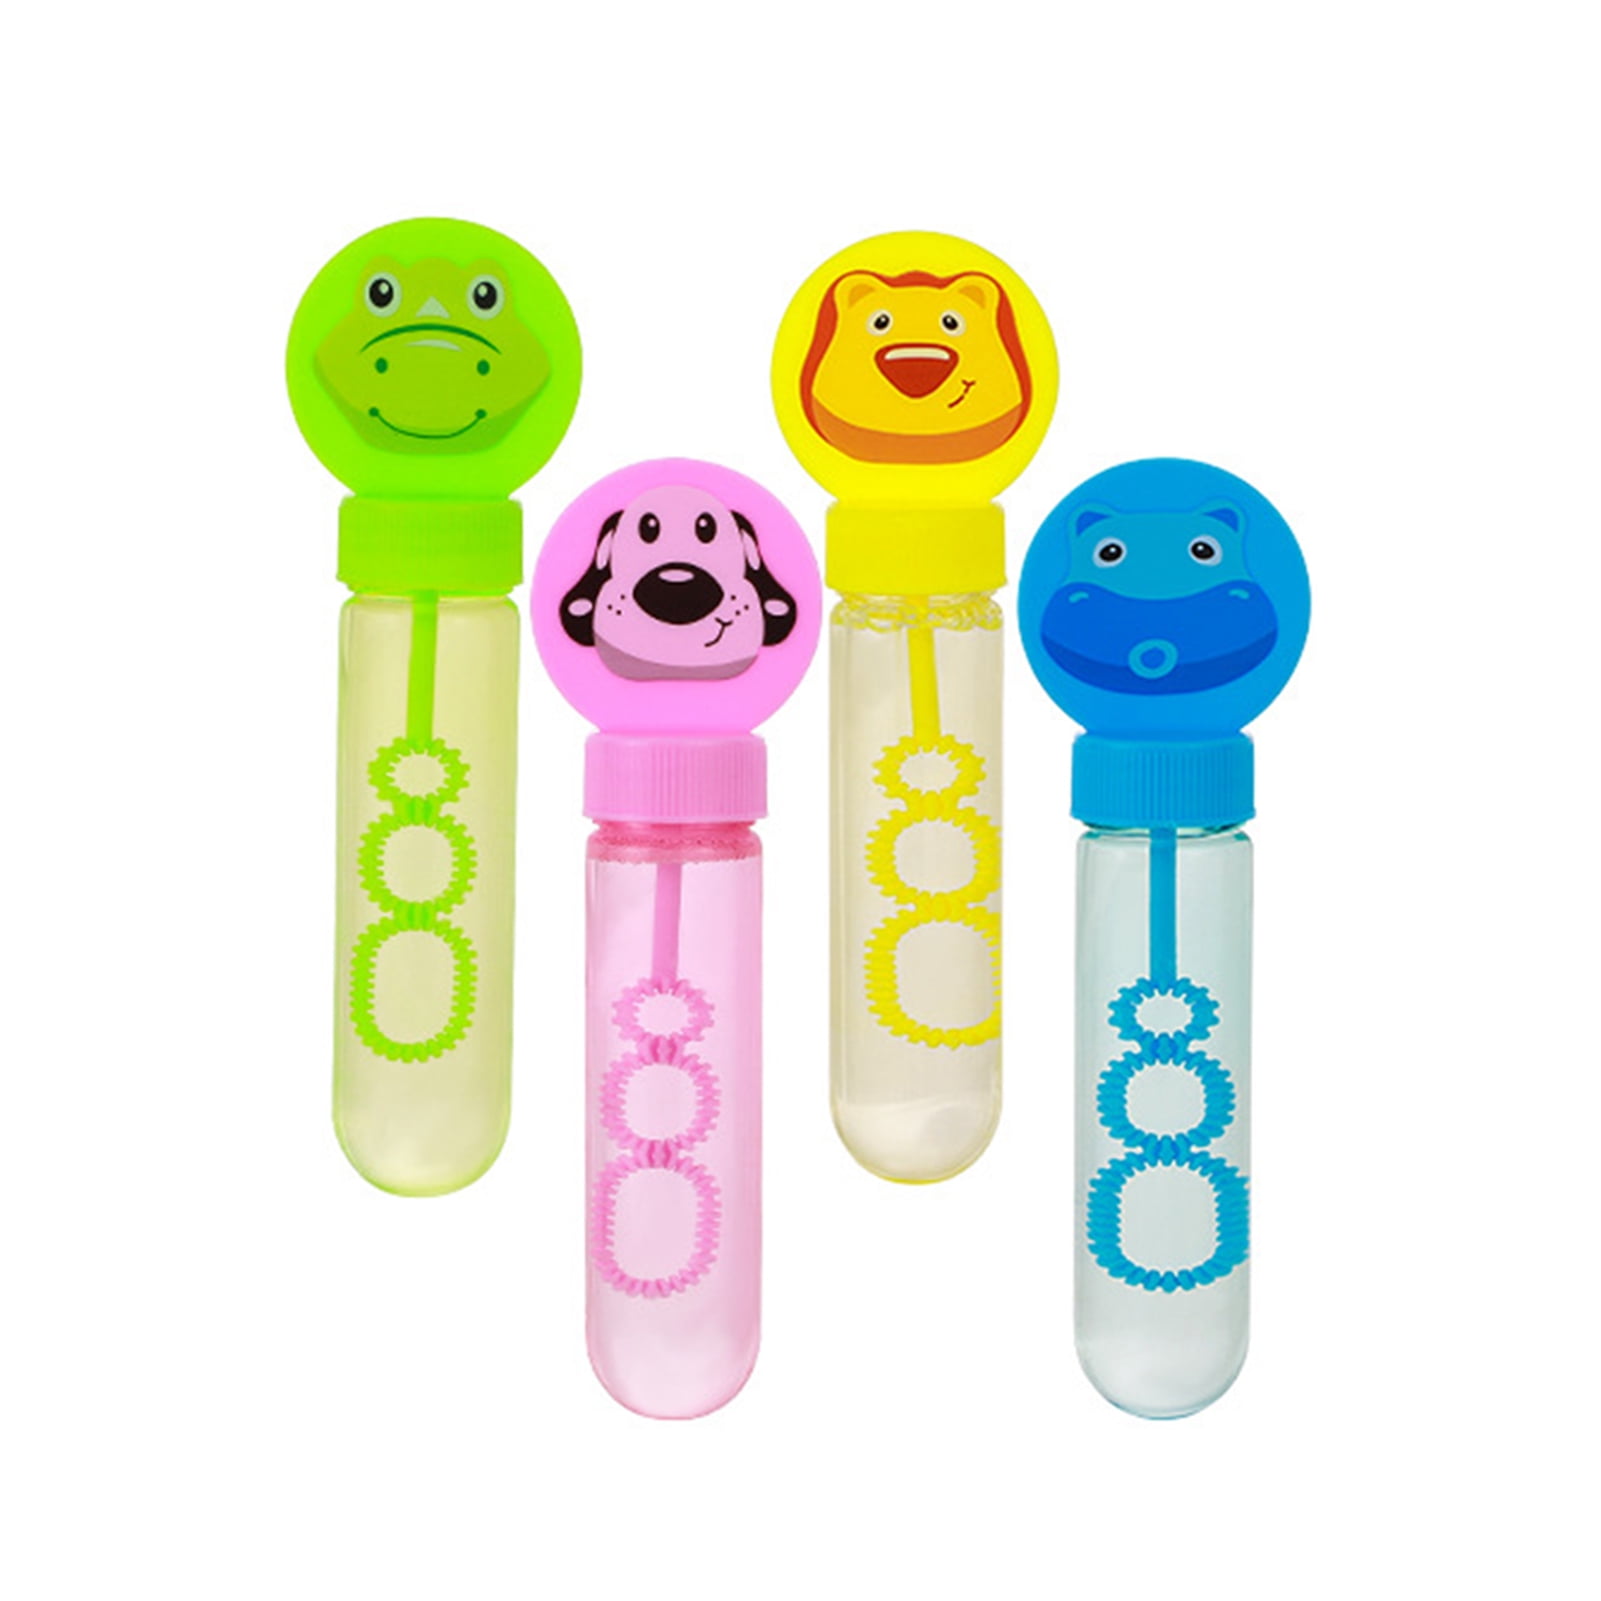 Skindy 1PC Cartoon Mini Bubble Blower and Fan Stick 2-in-1 Leak-Proof Toy  with Vivid Colors for Fun Entertainment and Kindergarten Play